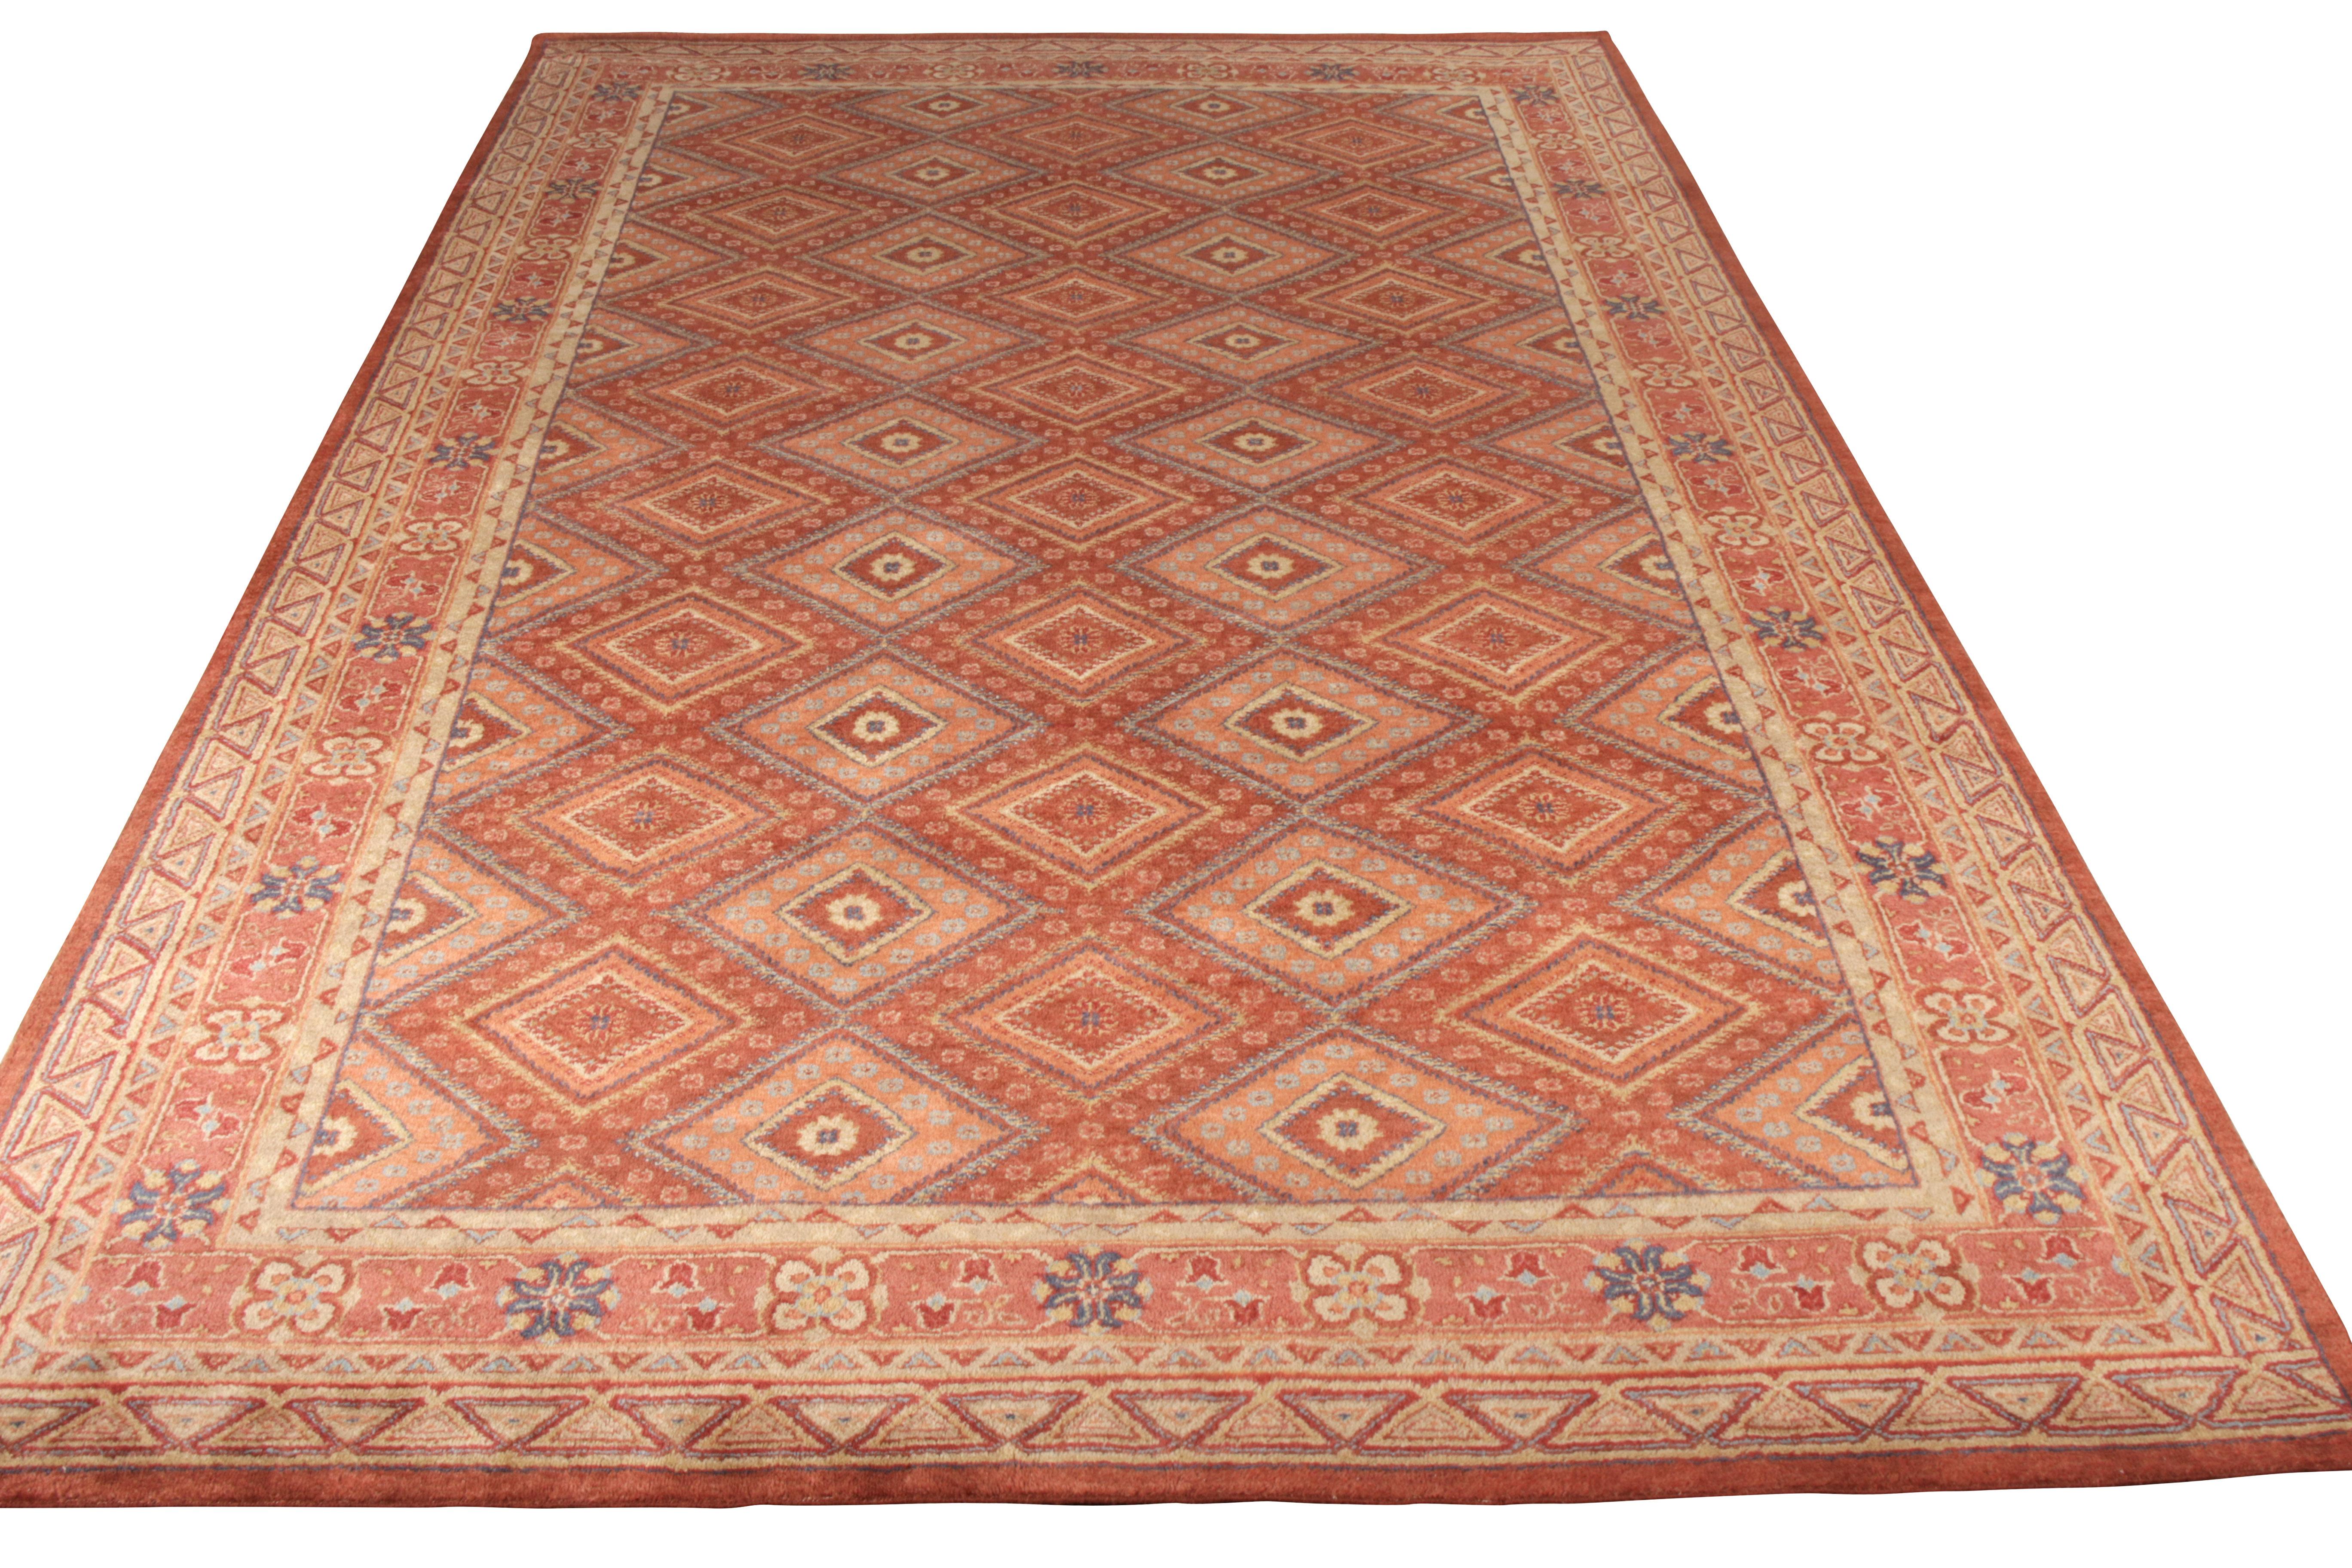 A 9 x 14 ode to classic style, Rug & Kilim rejoices as this distressed entry makes way to the team’s acclaimed Homage Collection. Inspired by traditional geometric design and colorway, the field witnesses a symmetric geometric pattern that comes to